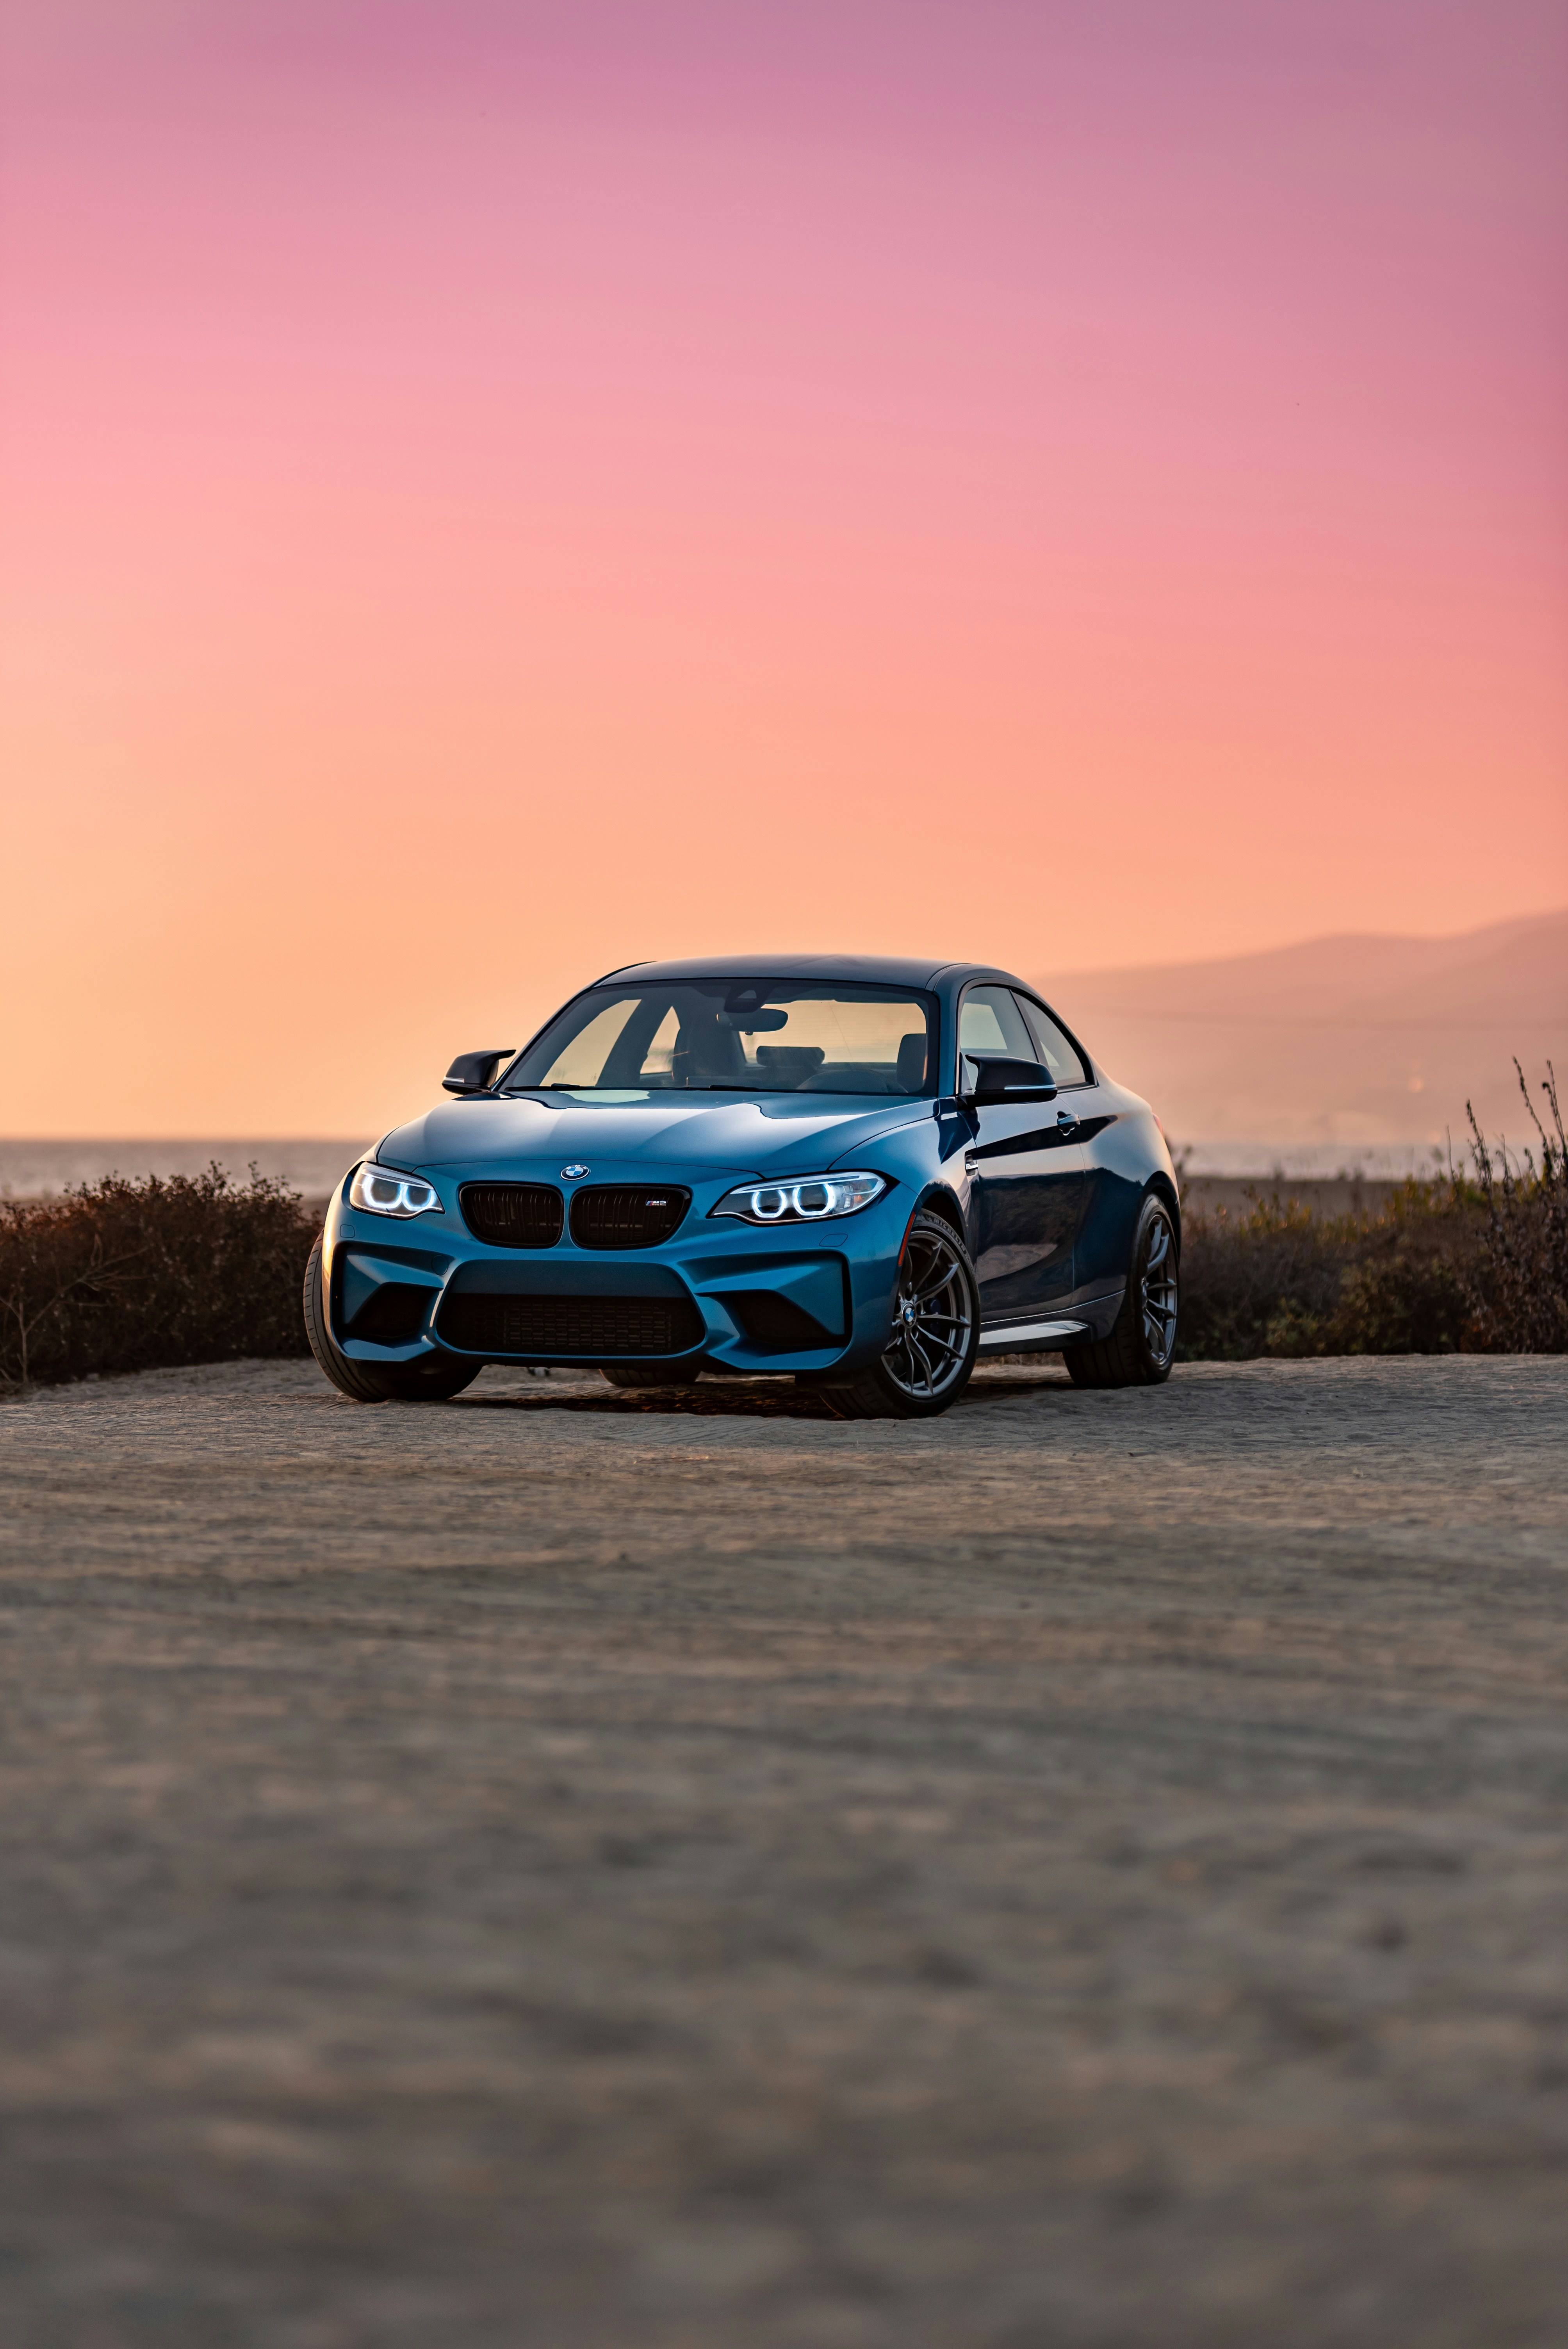 blue-bmw-m-3-on-road-during-daytime